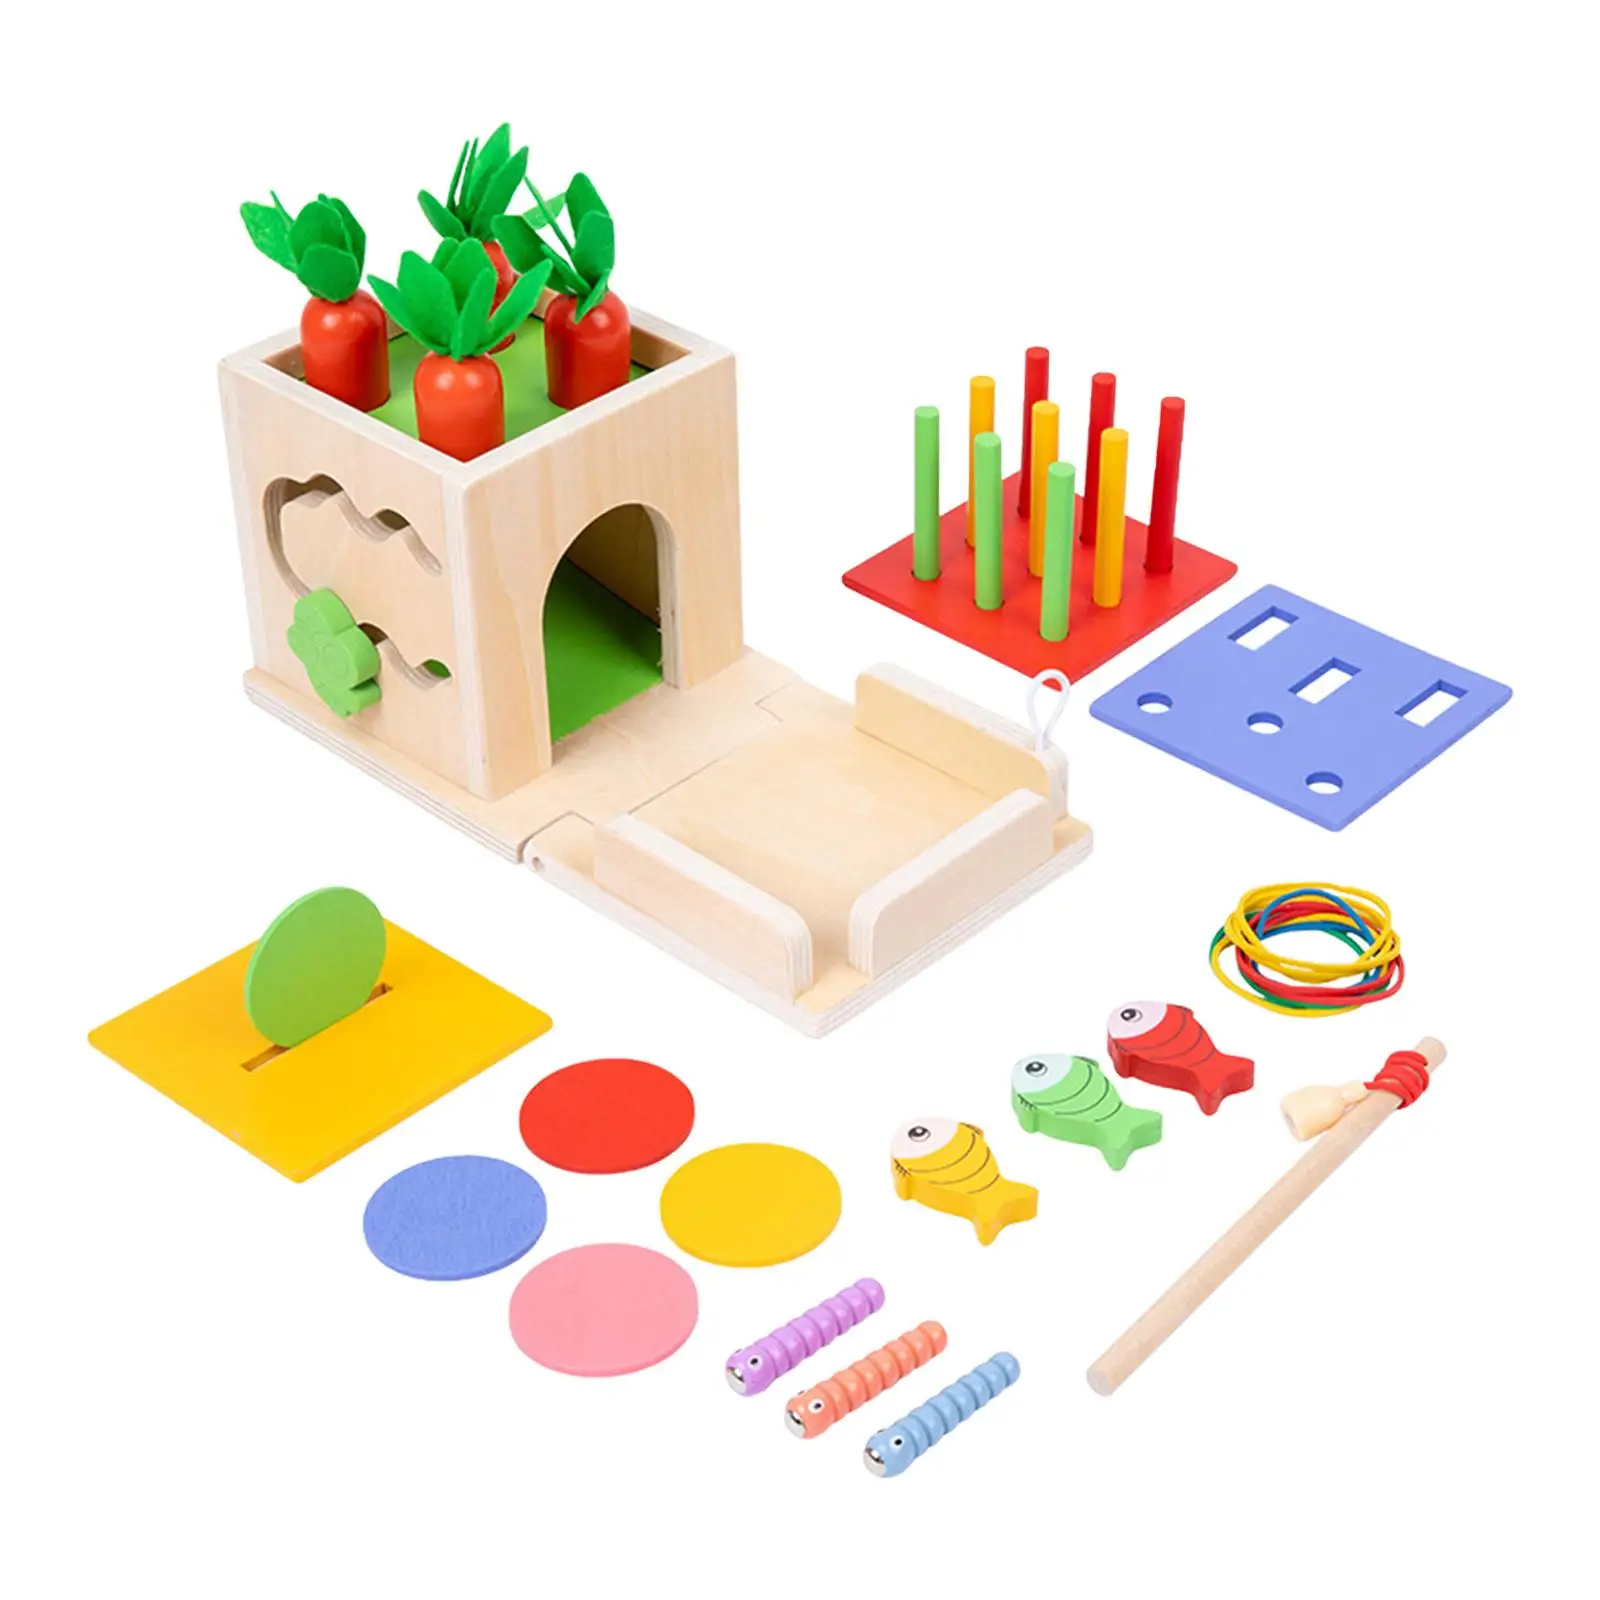 Montessori Toddler Play Kit Wooden Toy Box Set Montessori Toddler Educational Learning Toys Educational Toys for 1 2 3 Year Old